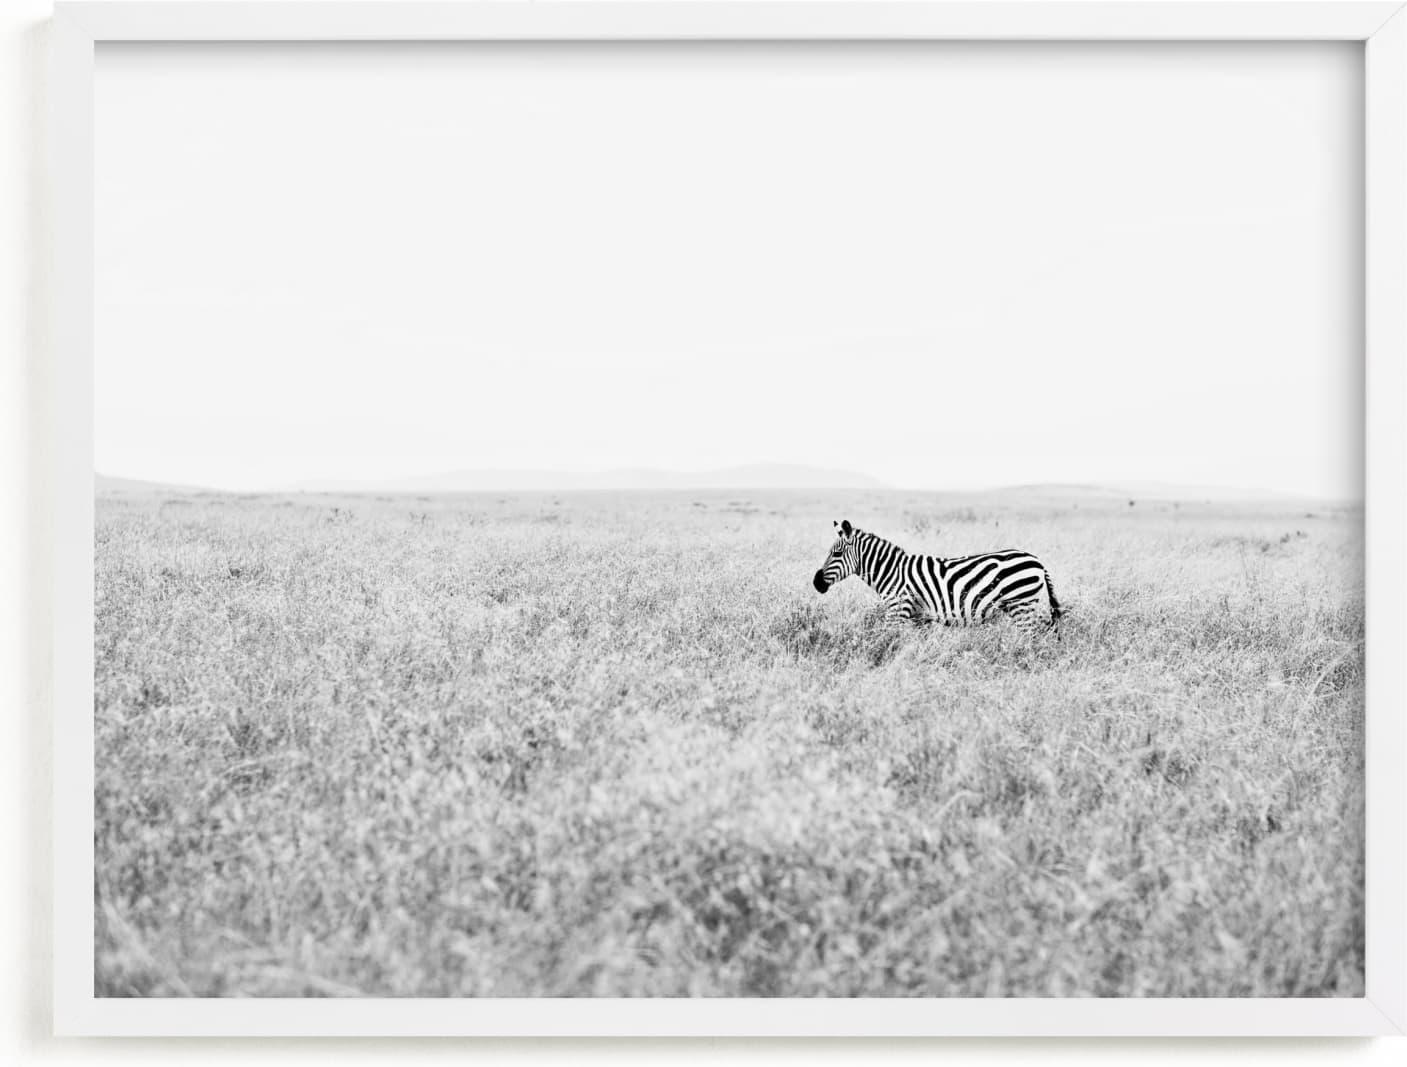 This is a black and white art by Alison Holcomb called Going Into the Wild.